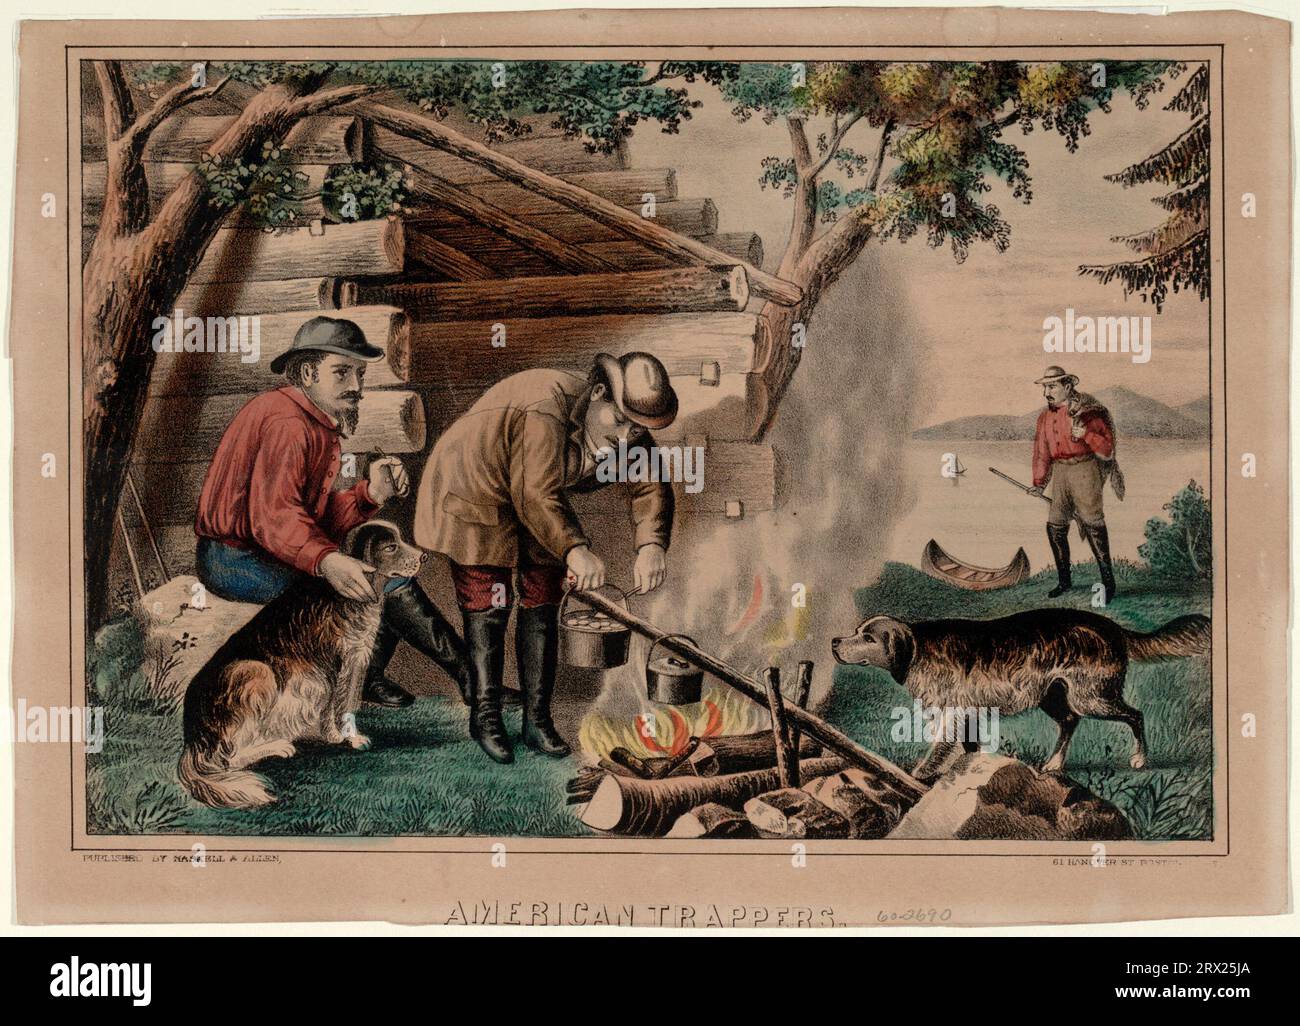 Lithograph, "American Trappers". DL*60.2690. Peters Prints Collection. Stock Photo